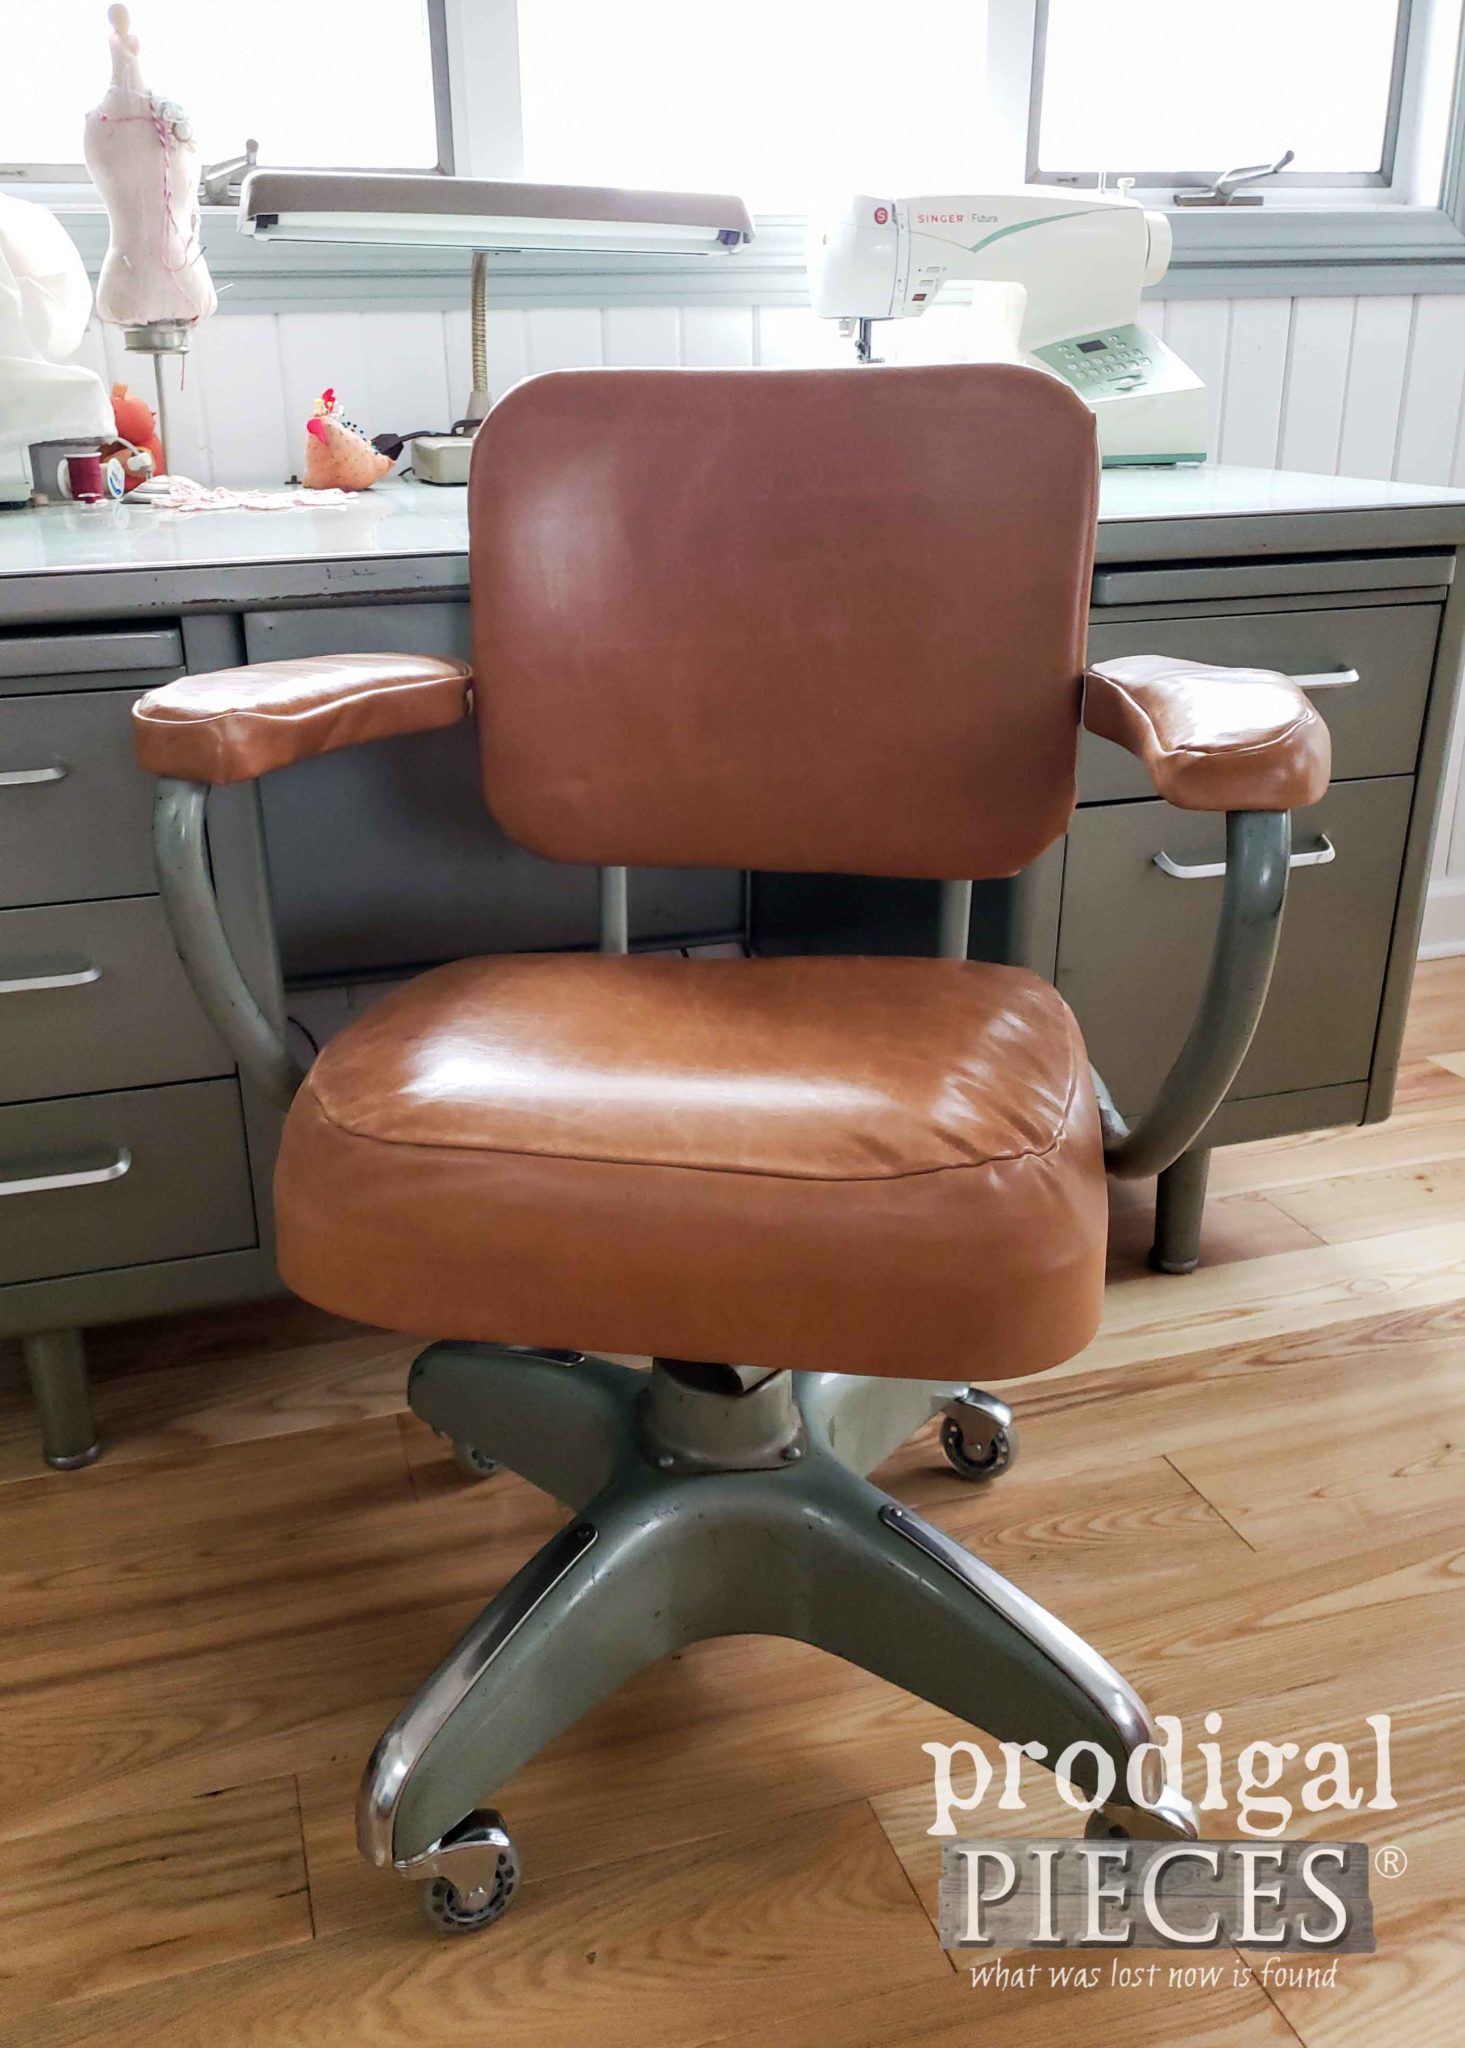 Upholstered Leather Office Chair for Vintage Industrial Style Decor by Larissa of Prodigal Pieces | prodigalpieces.com #prodigalpieces #diy #home #furniture #retro #homedecor #vintage